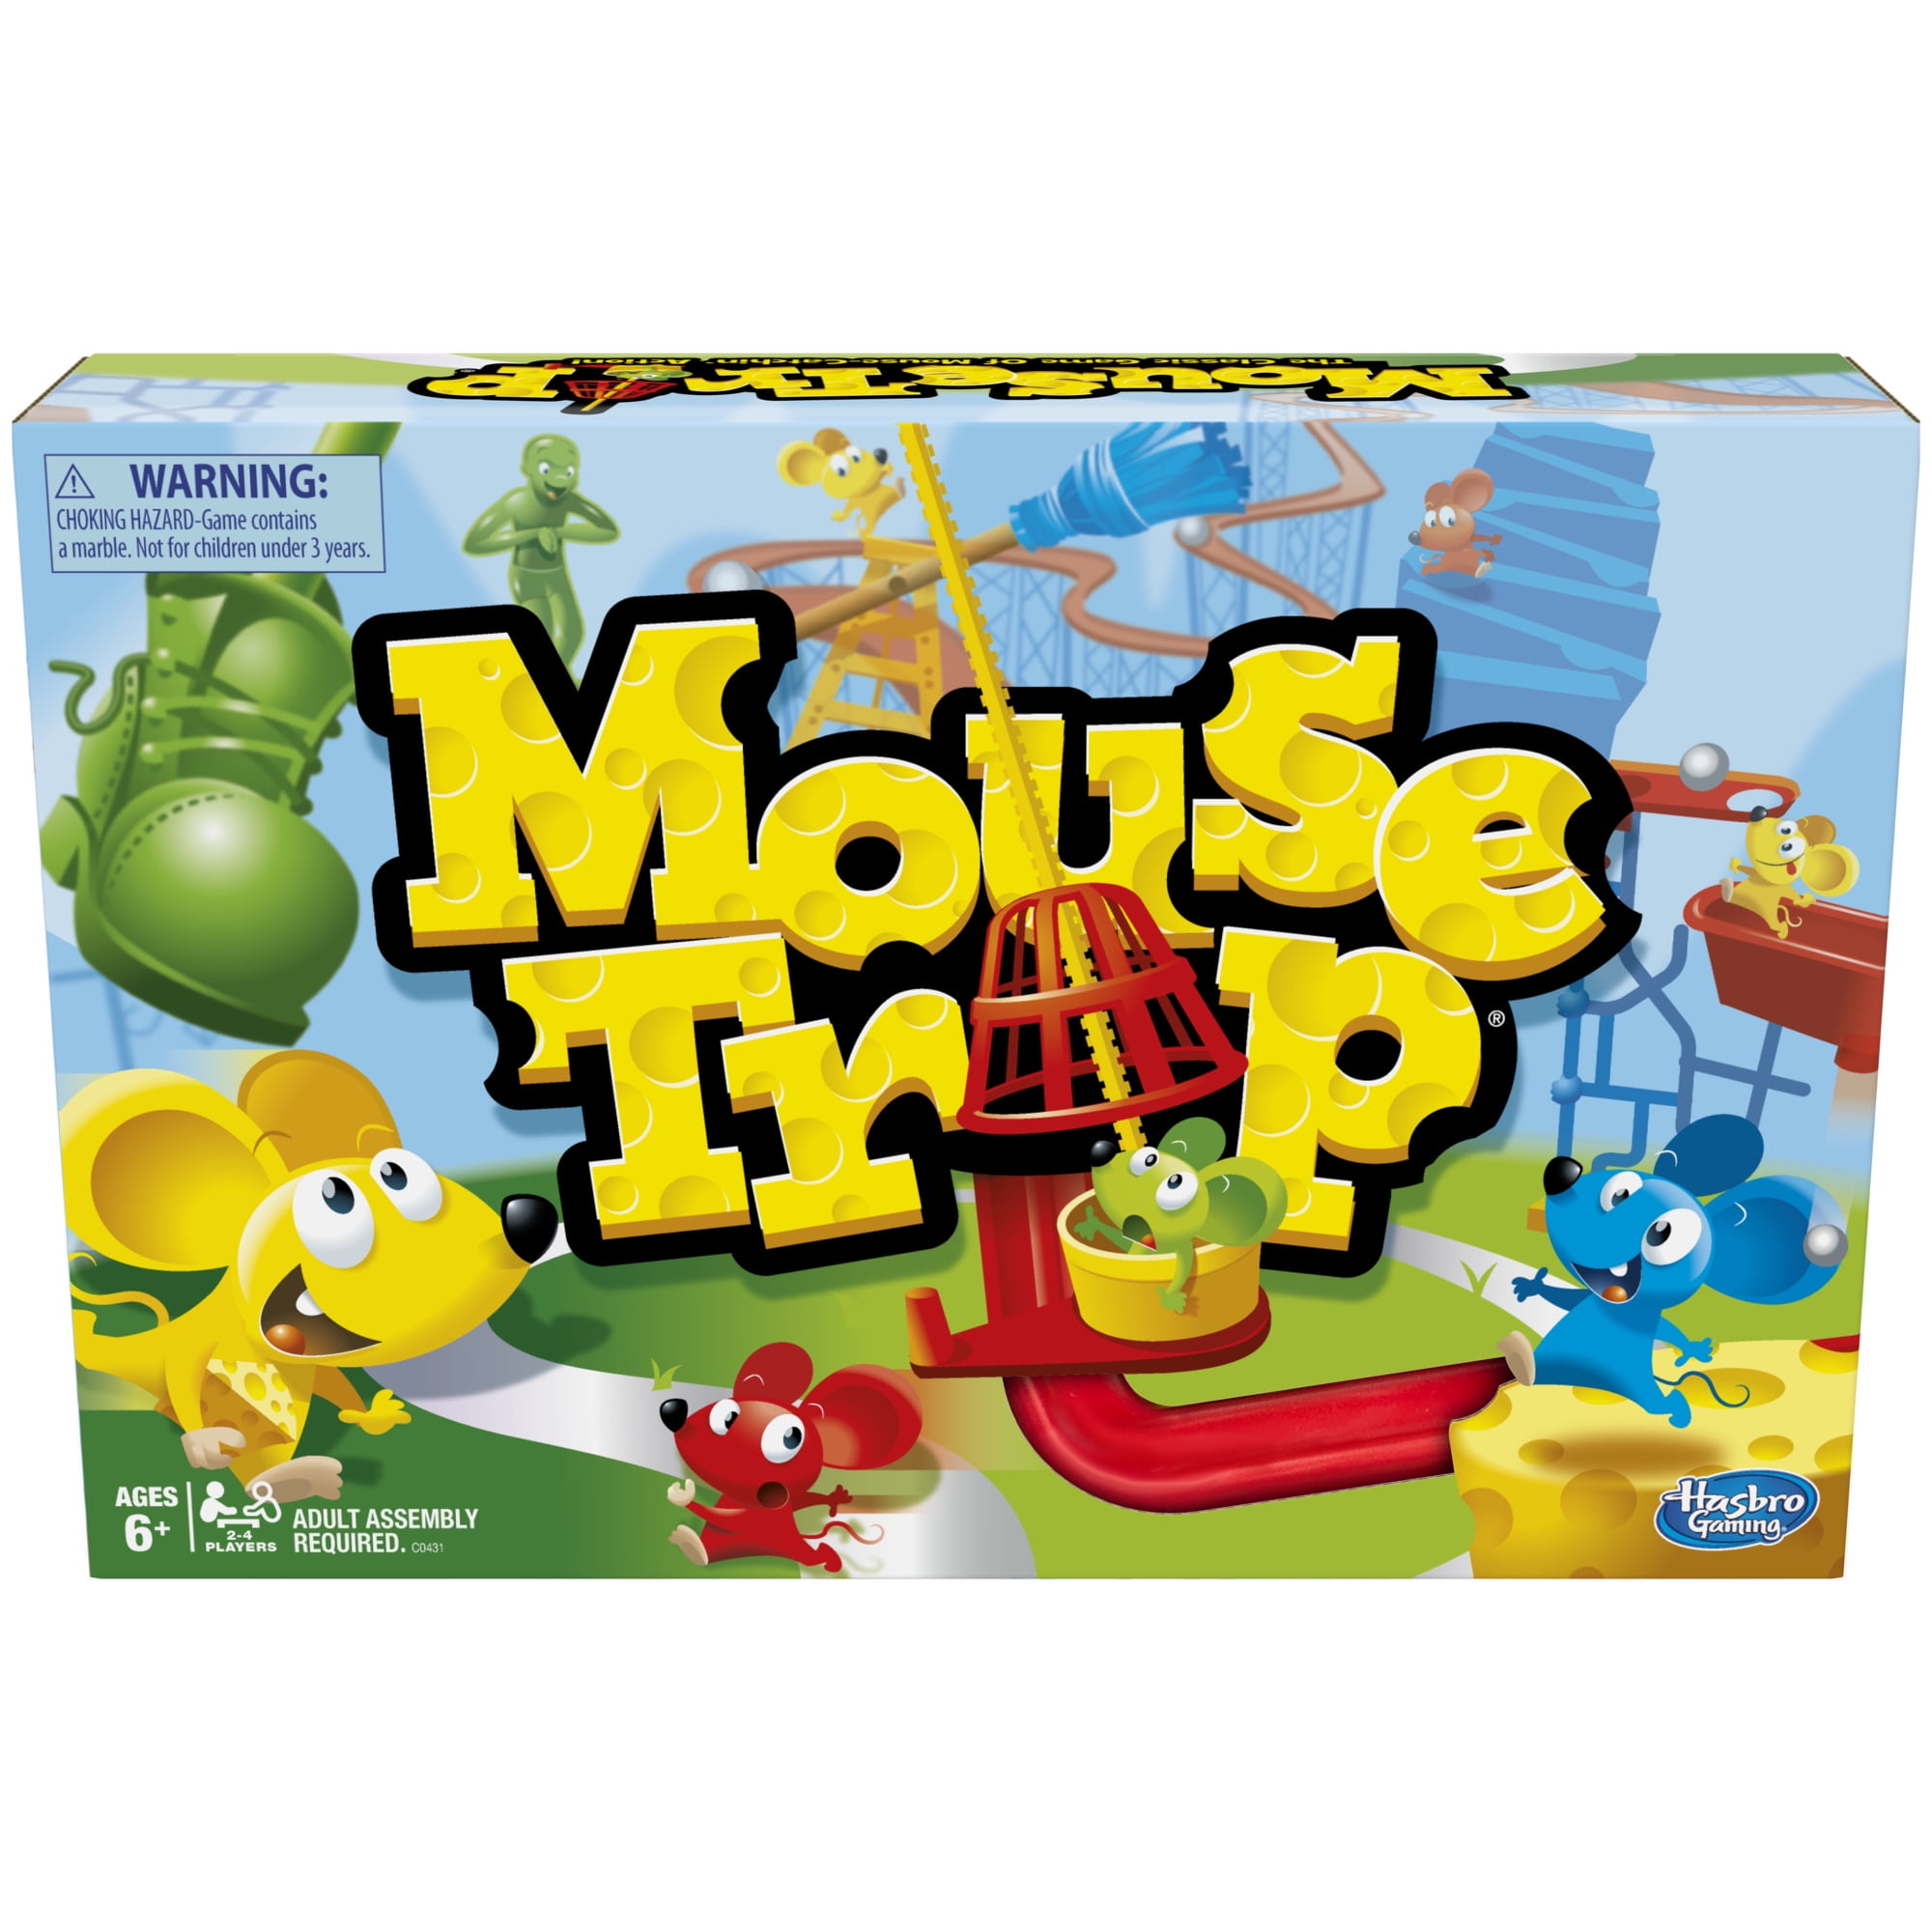 Mouse Trap Kids Board Game, Kids Game for 2-4 Players, Easier Set-Up